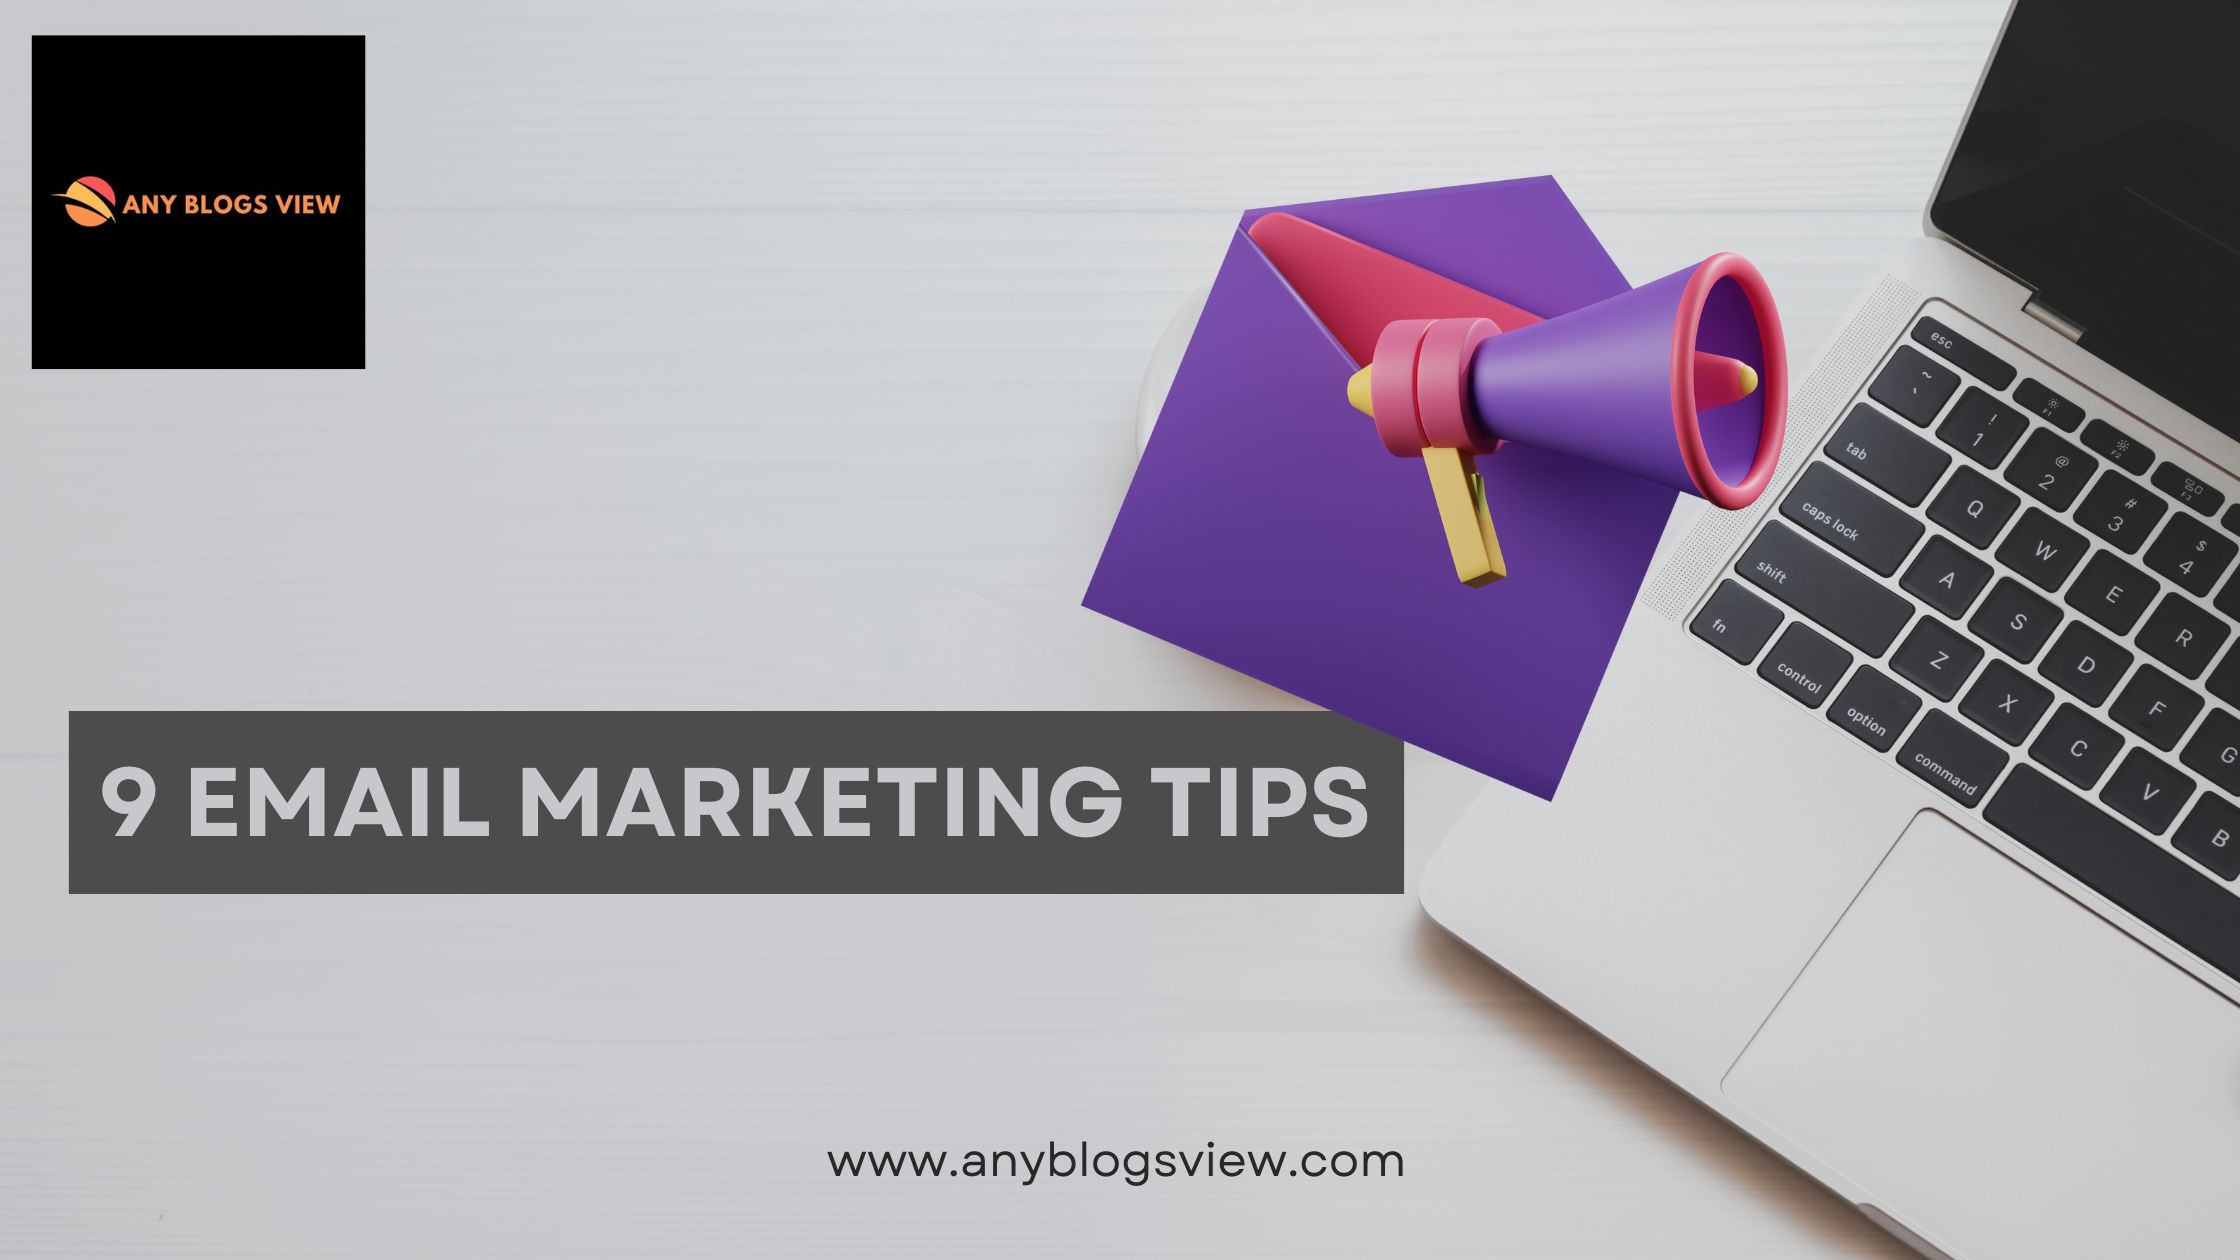 9 Email Marketing Tips: Take Action Now! - Bloggers World- Engagerank.com